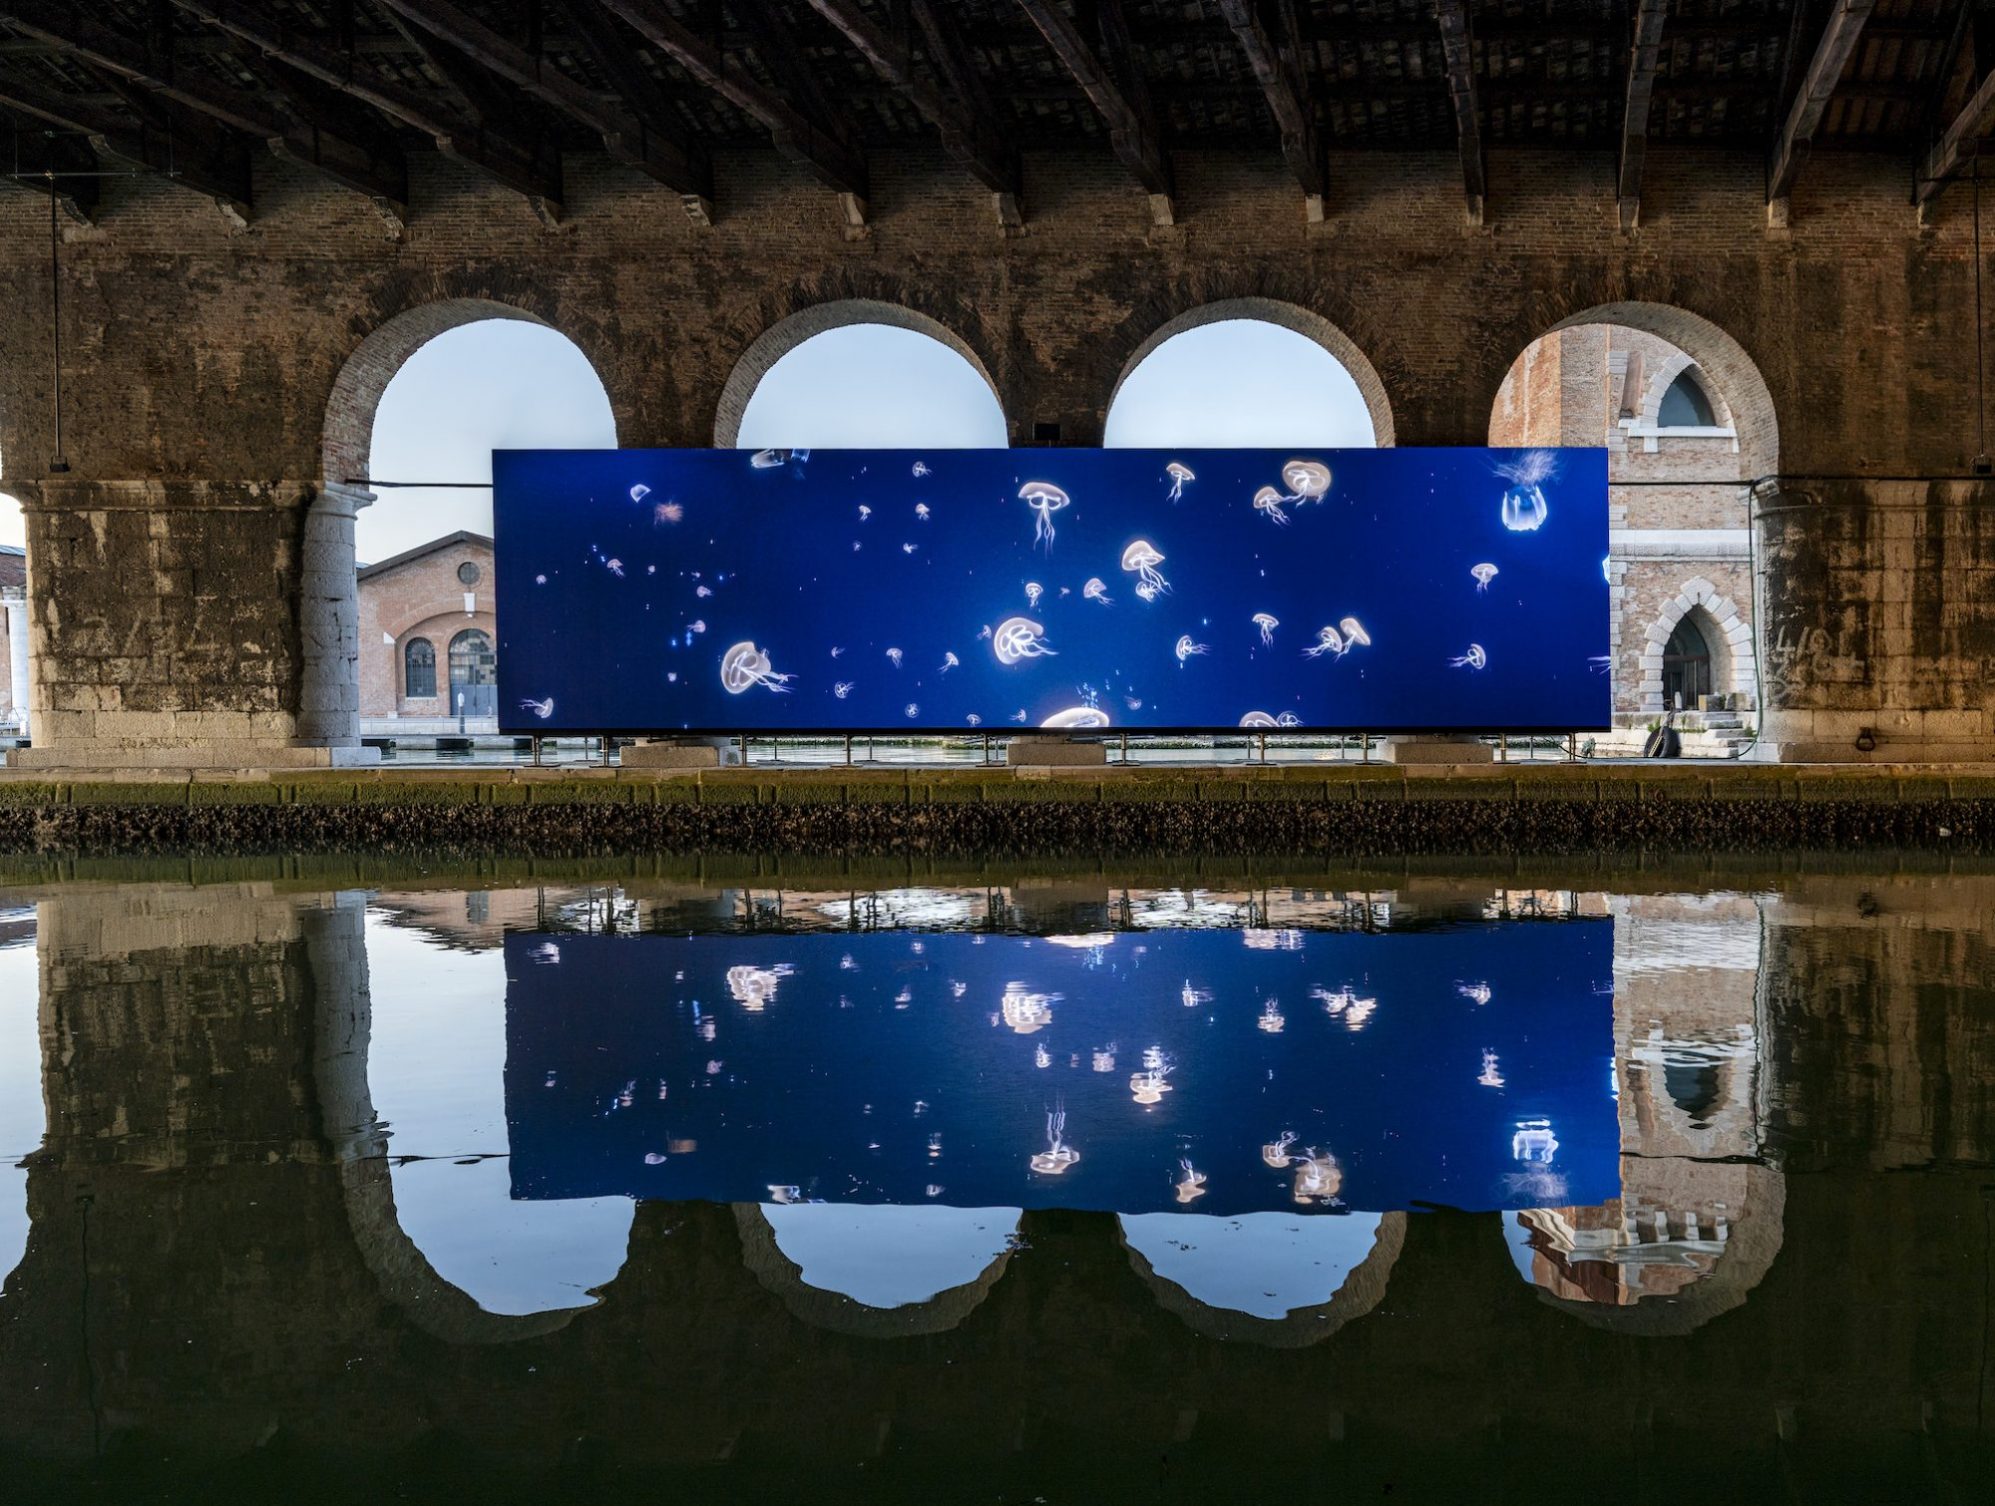 Wide horizontal screen of jellyfish against a blue ocean installed against arched doorways outdoors and reflected in water